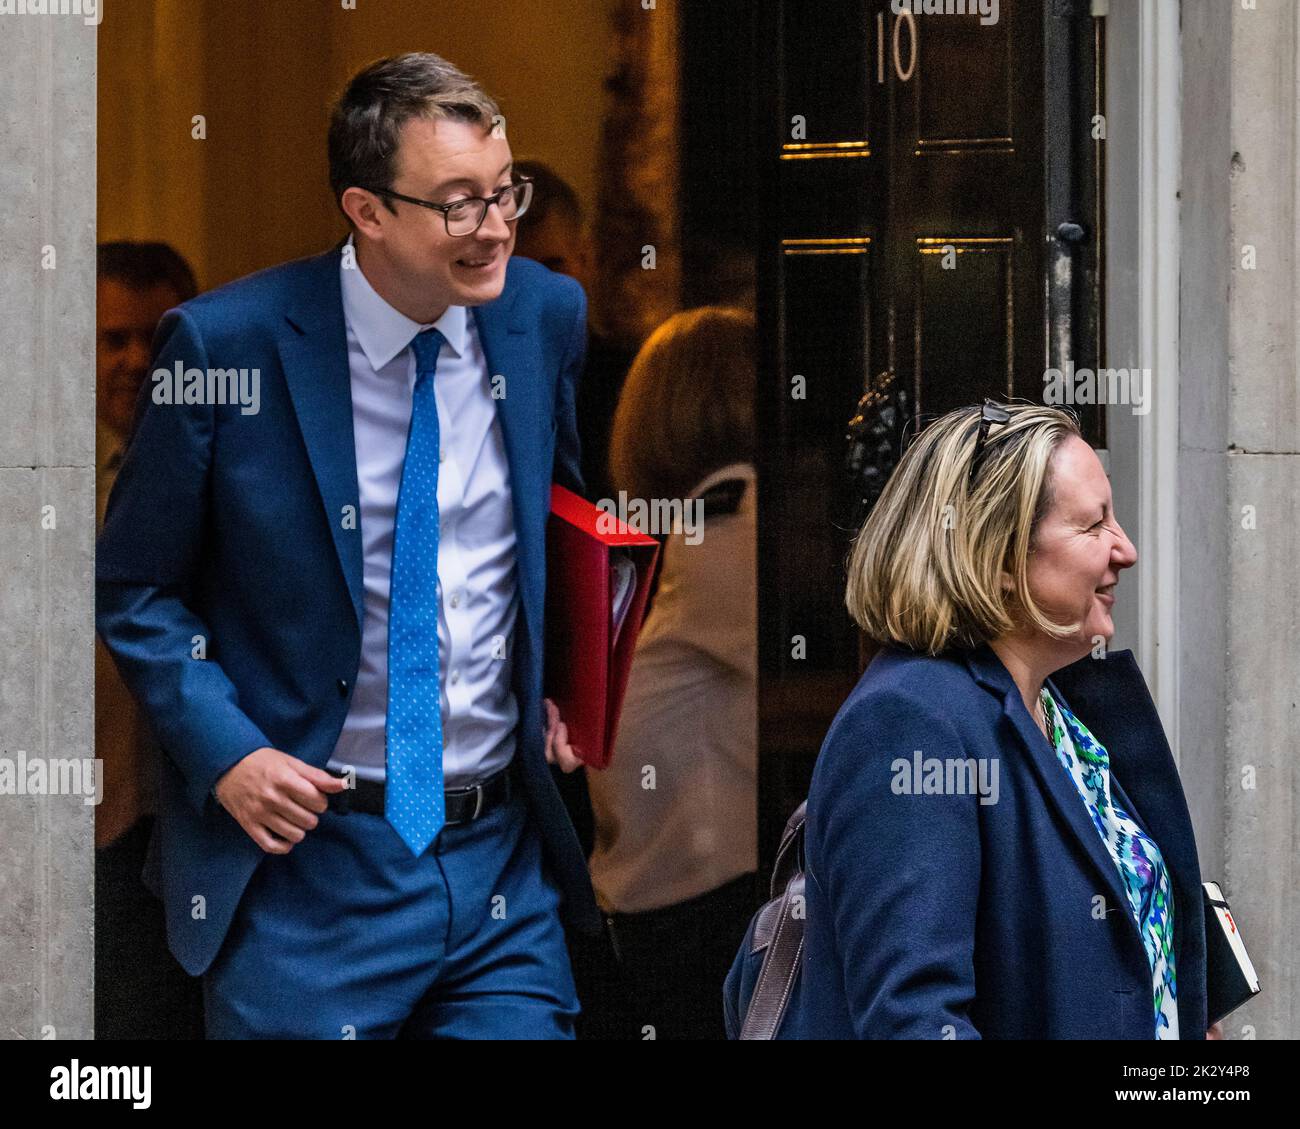 London, UK. 23rd Sep, 2022. Anne-Marie Trevelyan, Secretary of State for Transport with Simon Clarke, Secretary of State for Levelling Up, Housing and Communities behind - Leaving after the Cabinet meeting before The Chancellor leaves Downing Street to make a statement on the government's plans for growth. Credit: Guy Bell/Alamy Live News Stock Photo